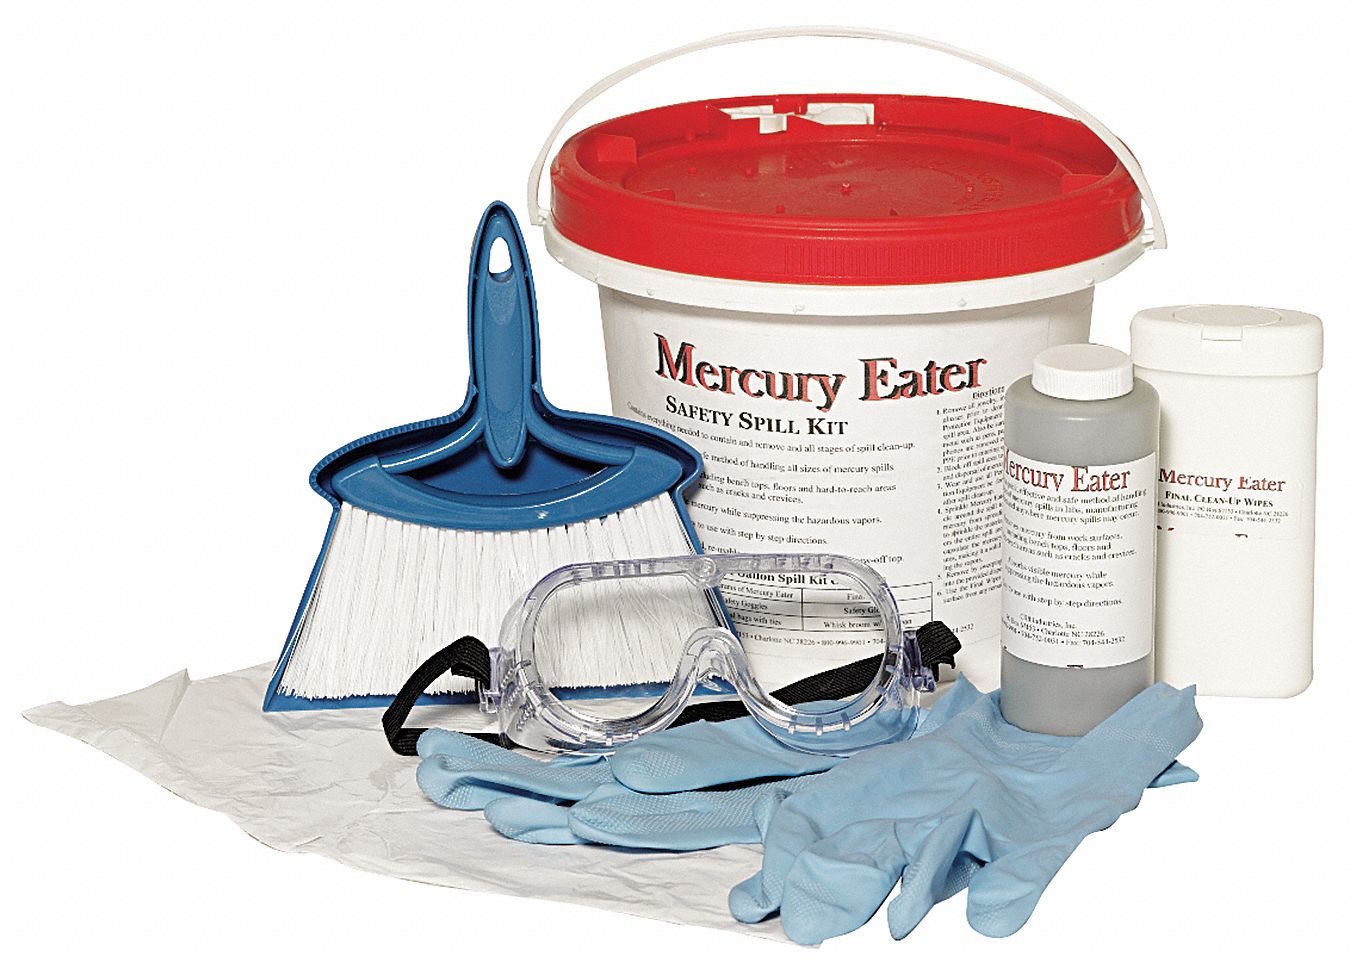 Spill Kit,  Fluids Absorbed Mercury,  Container Type Bottle,  5 gal Container Capacity